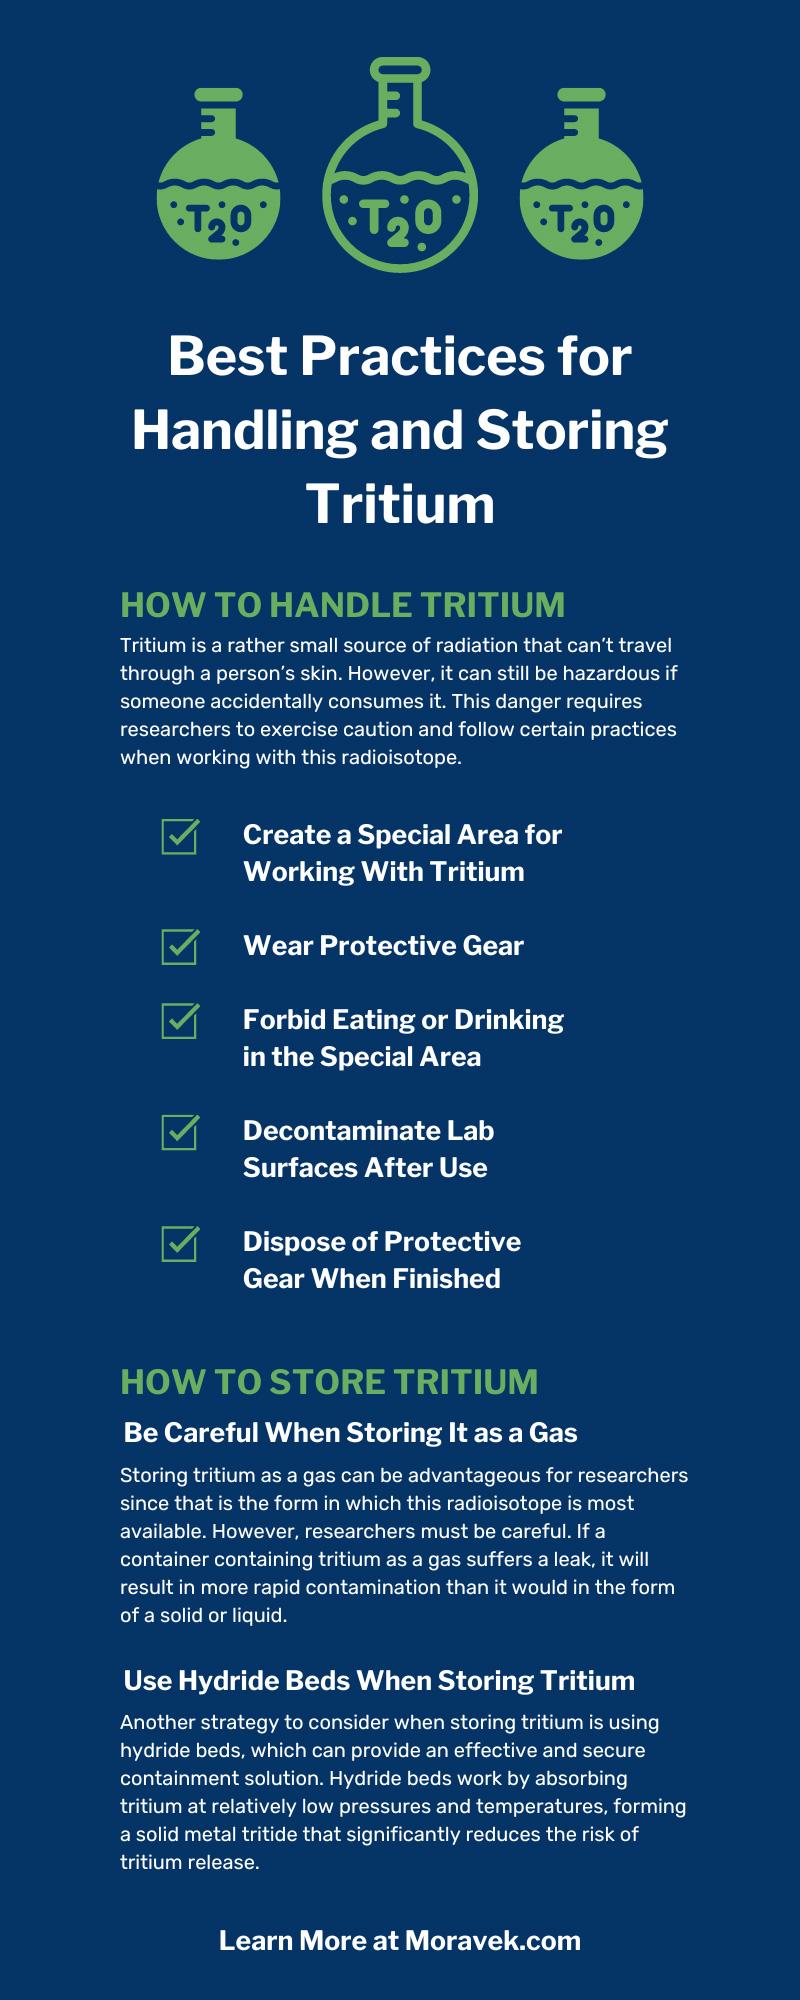 Best Practices for Handling and Storing Tritium